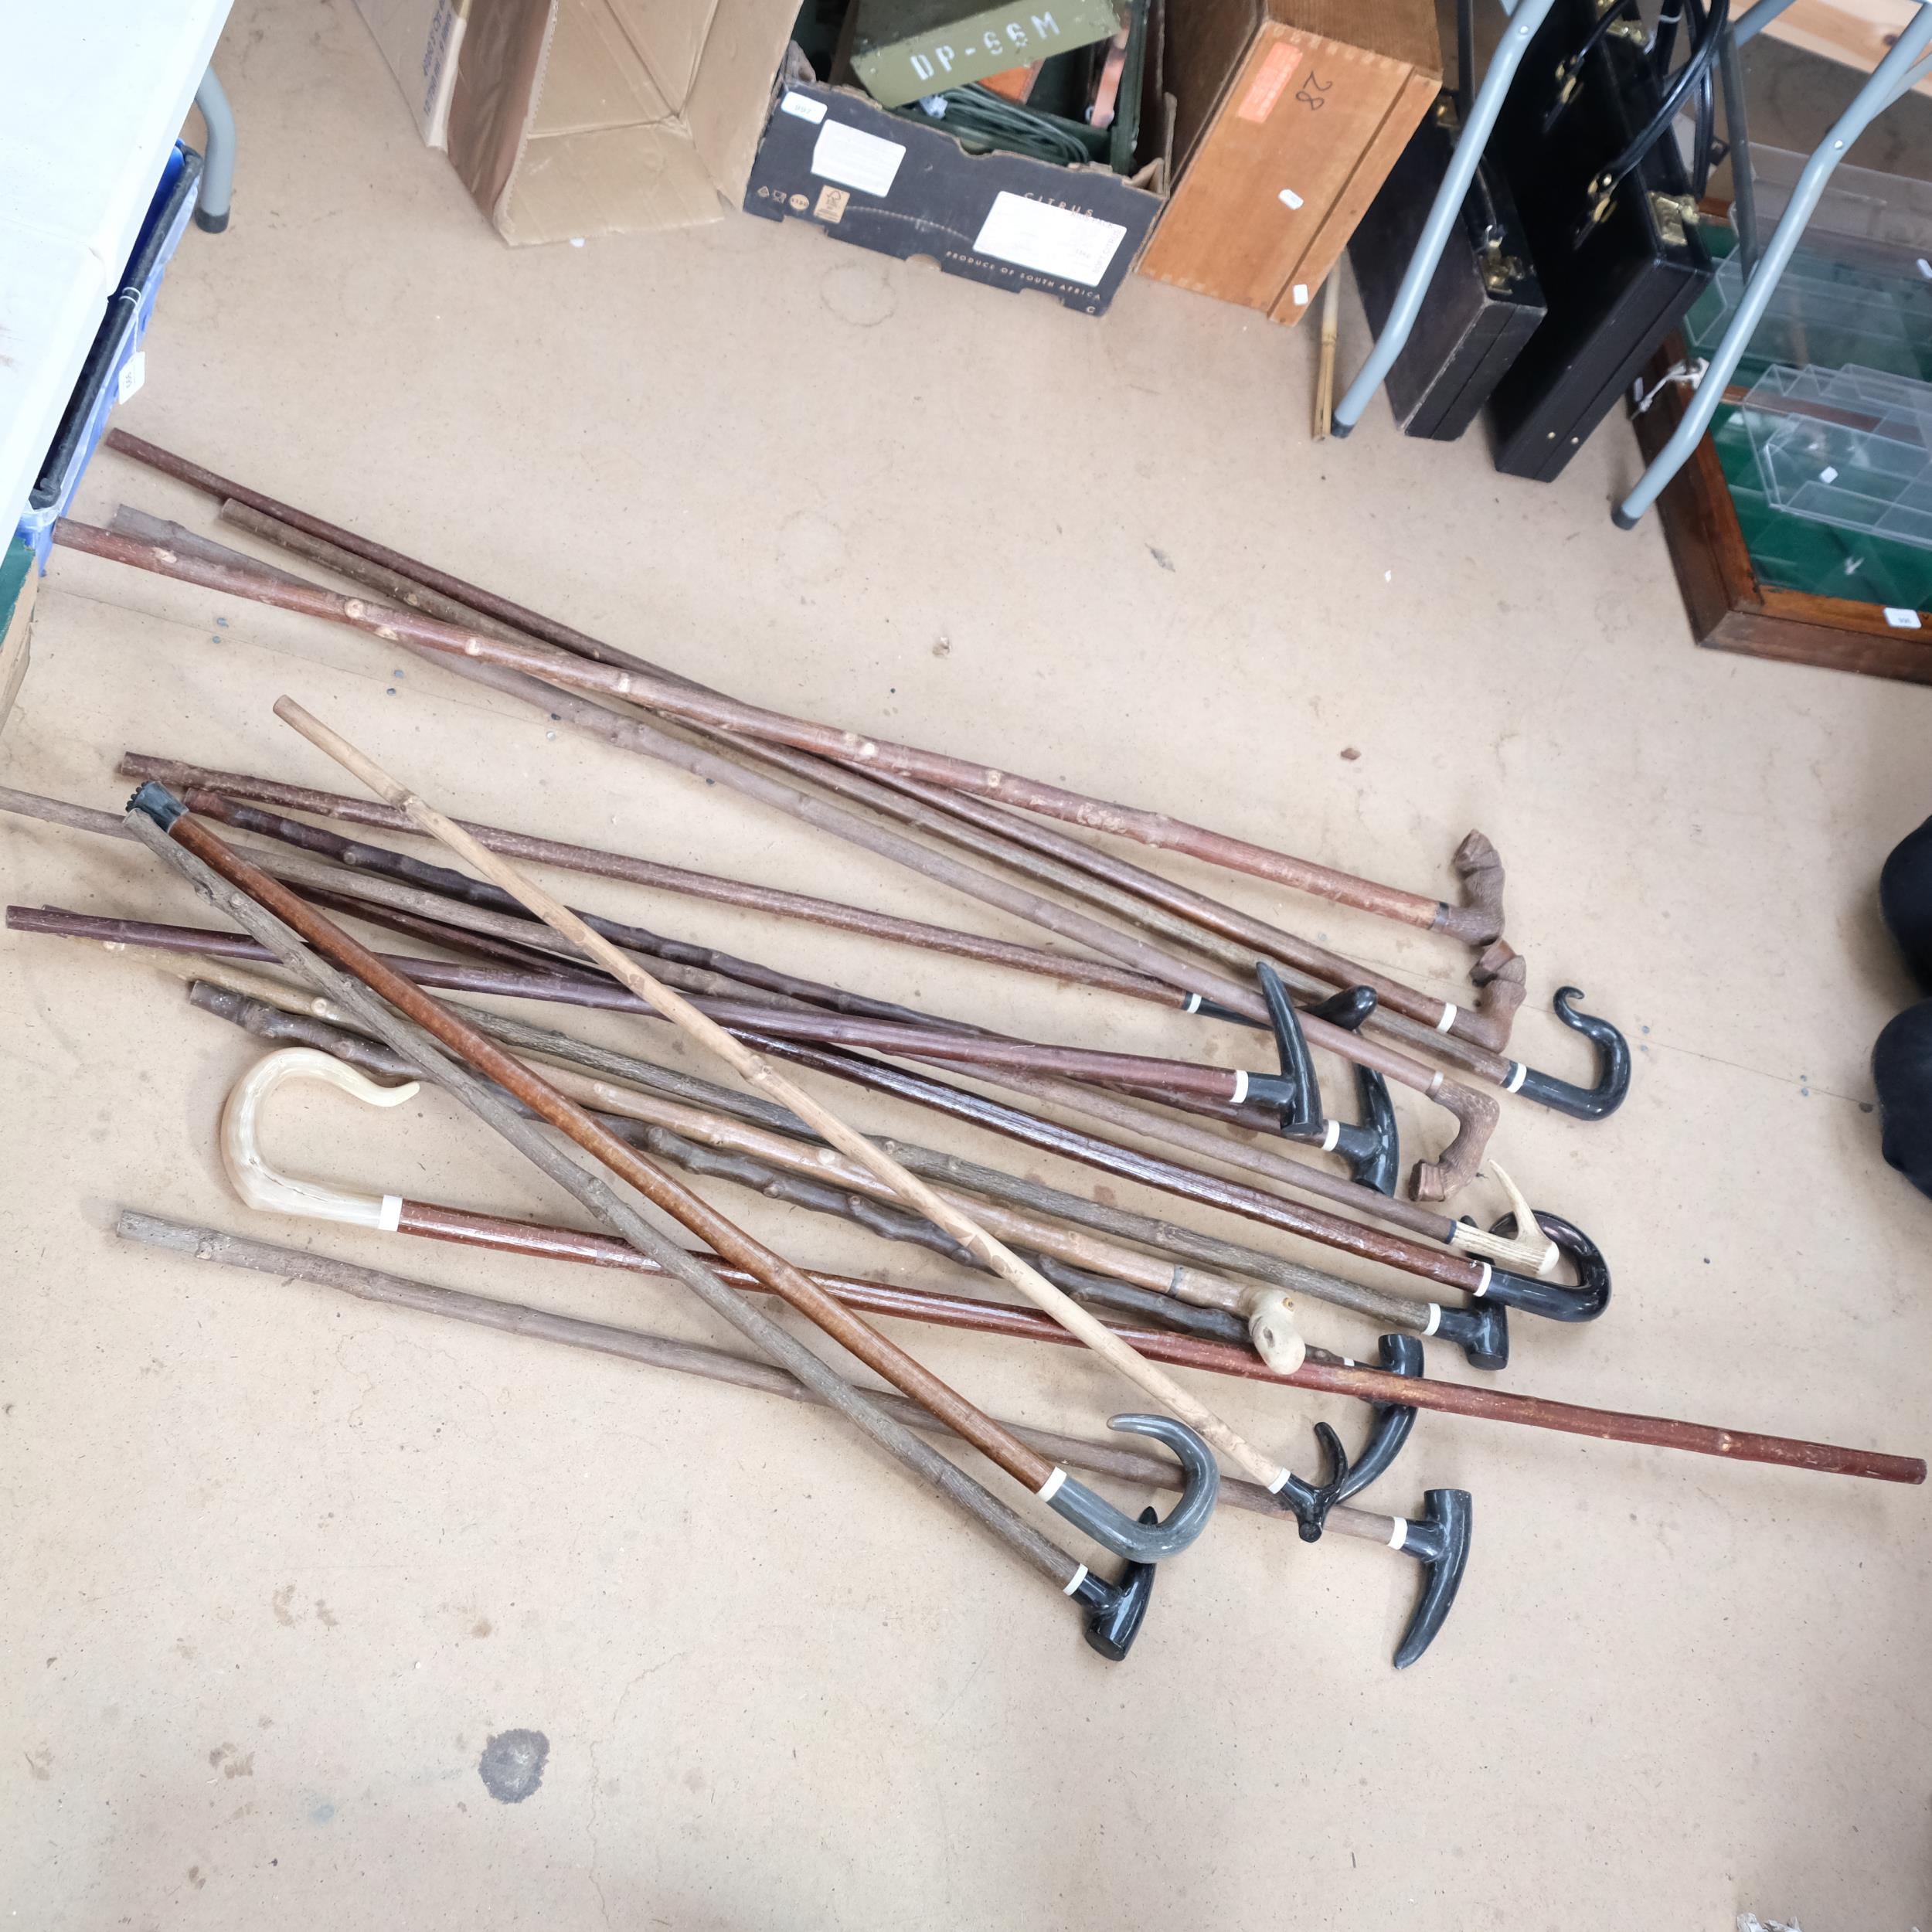 A collection of 17 various walking sticks and staffs, hoof and horn-handled - Image 2 of 2